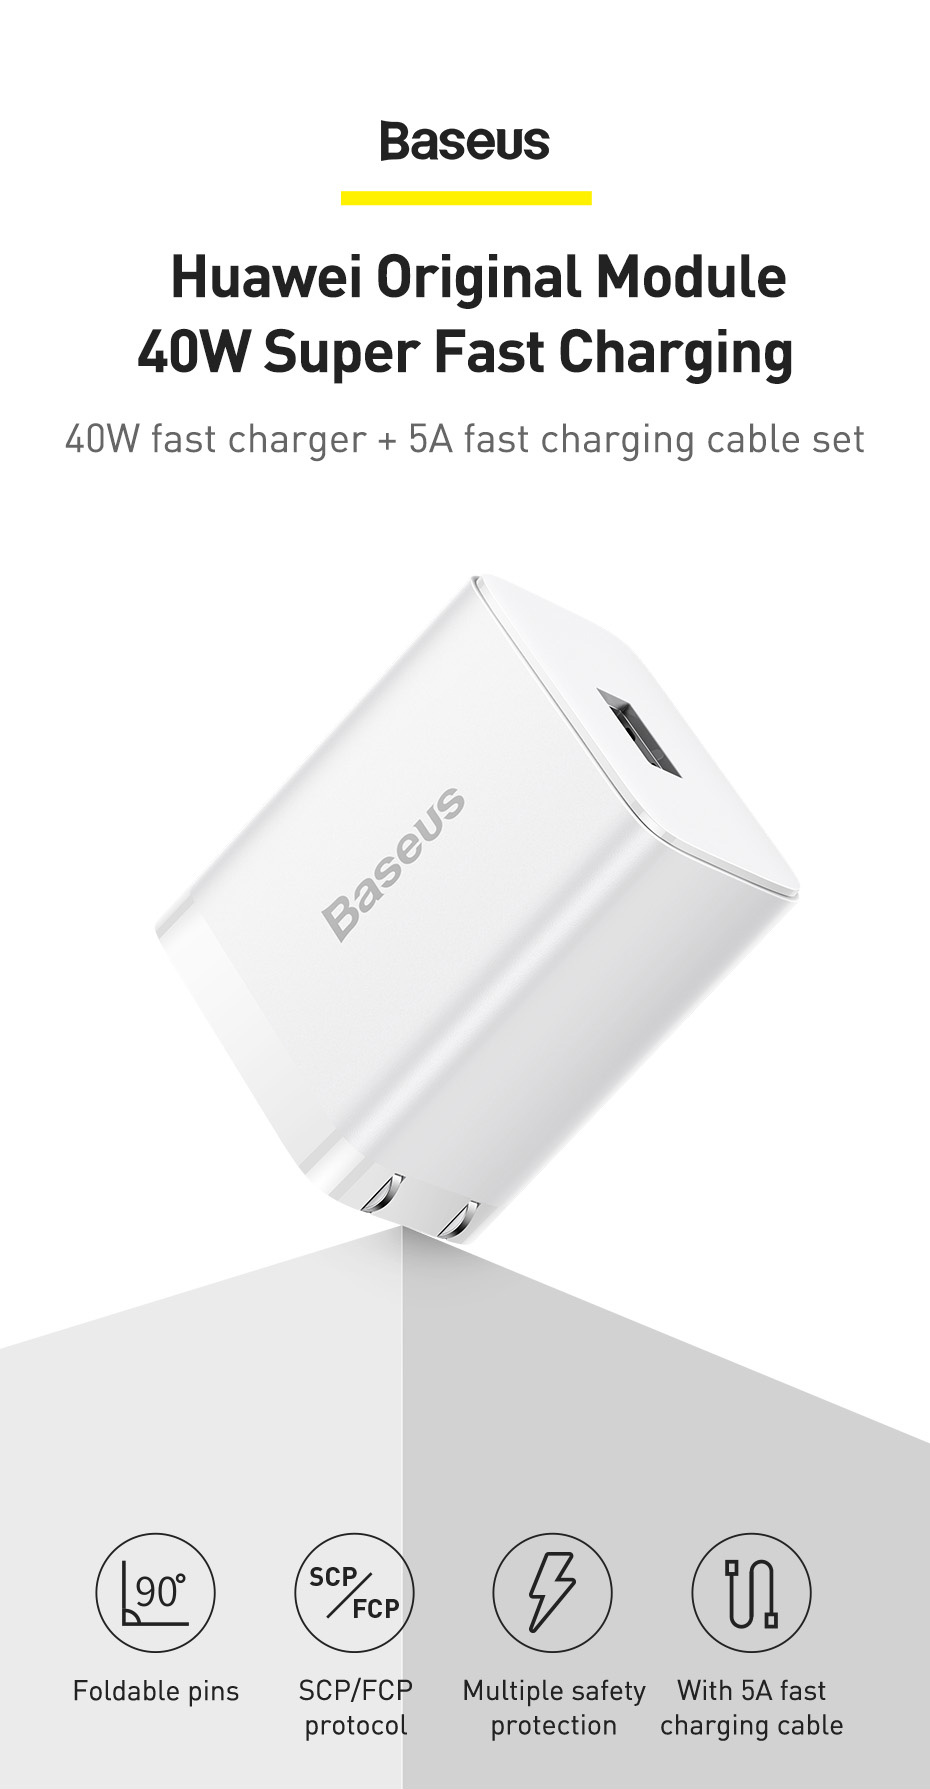 Baseus 40W Fast Charging USB Charger Wall Charger Adapter CN Plug With 5A USB to USB-C Cable For iPhone 12 Pro Max For Samsung Galaxy S21 Note S20 ultra Huawei Mate40 P50 OnePlus 9 Pro